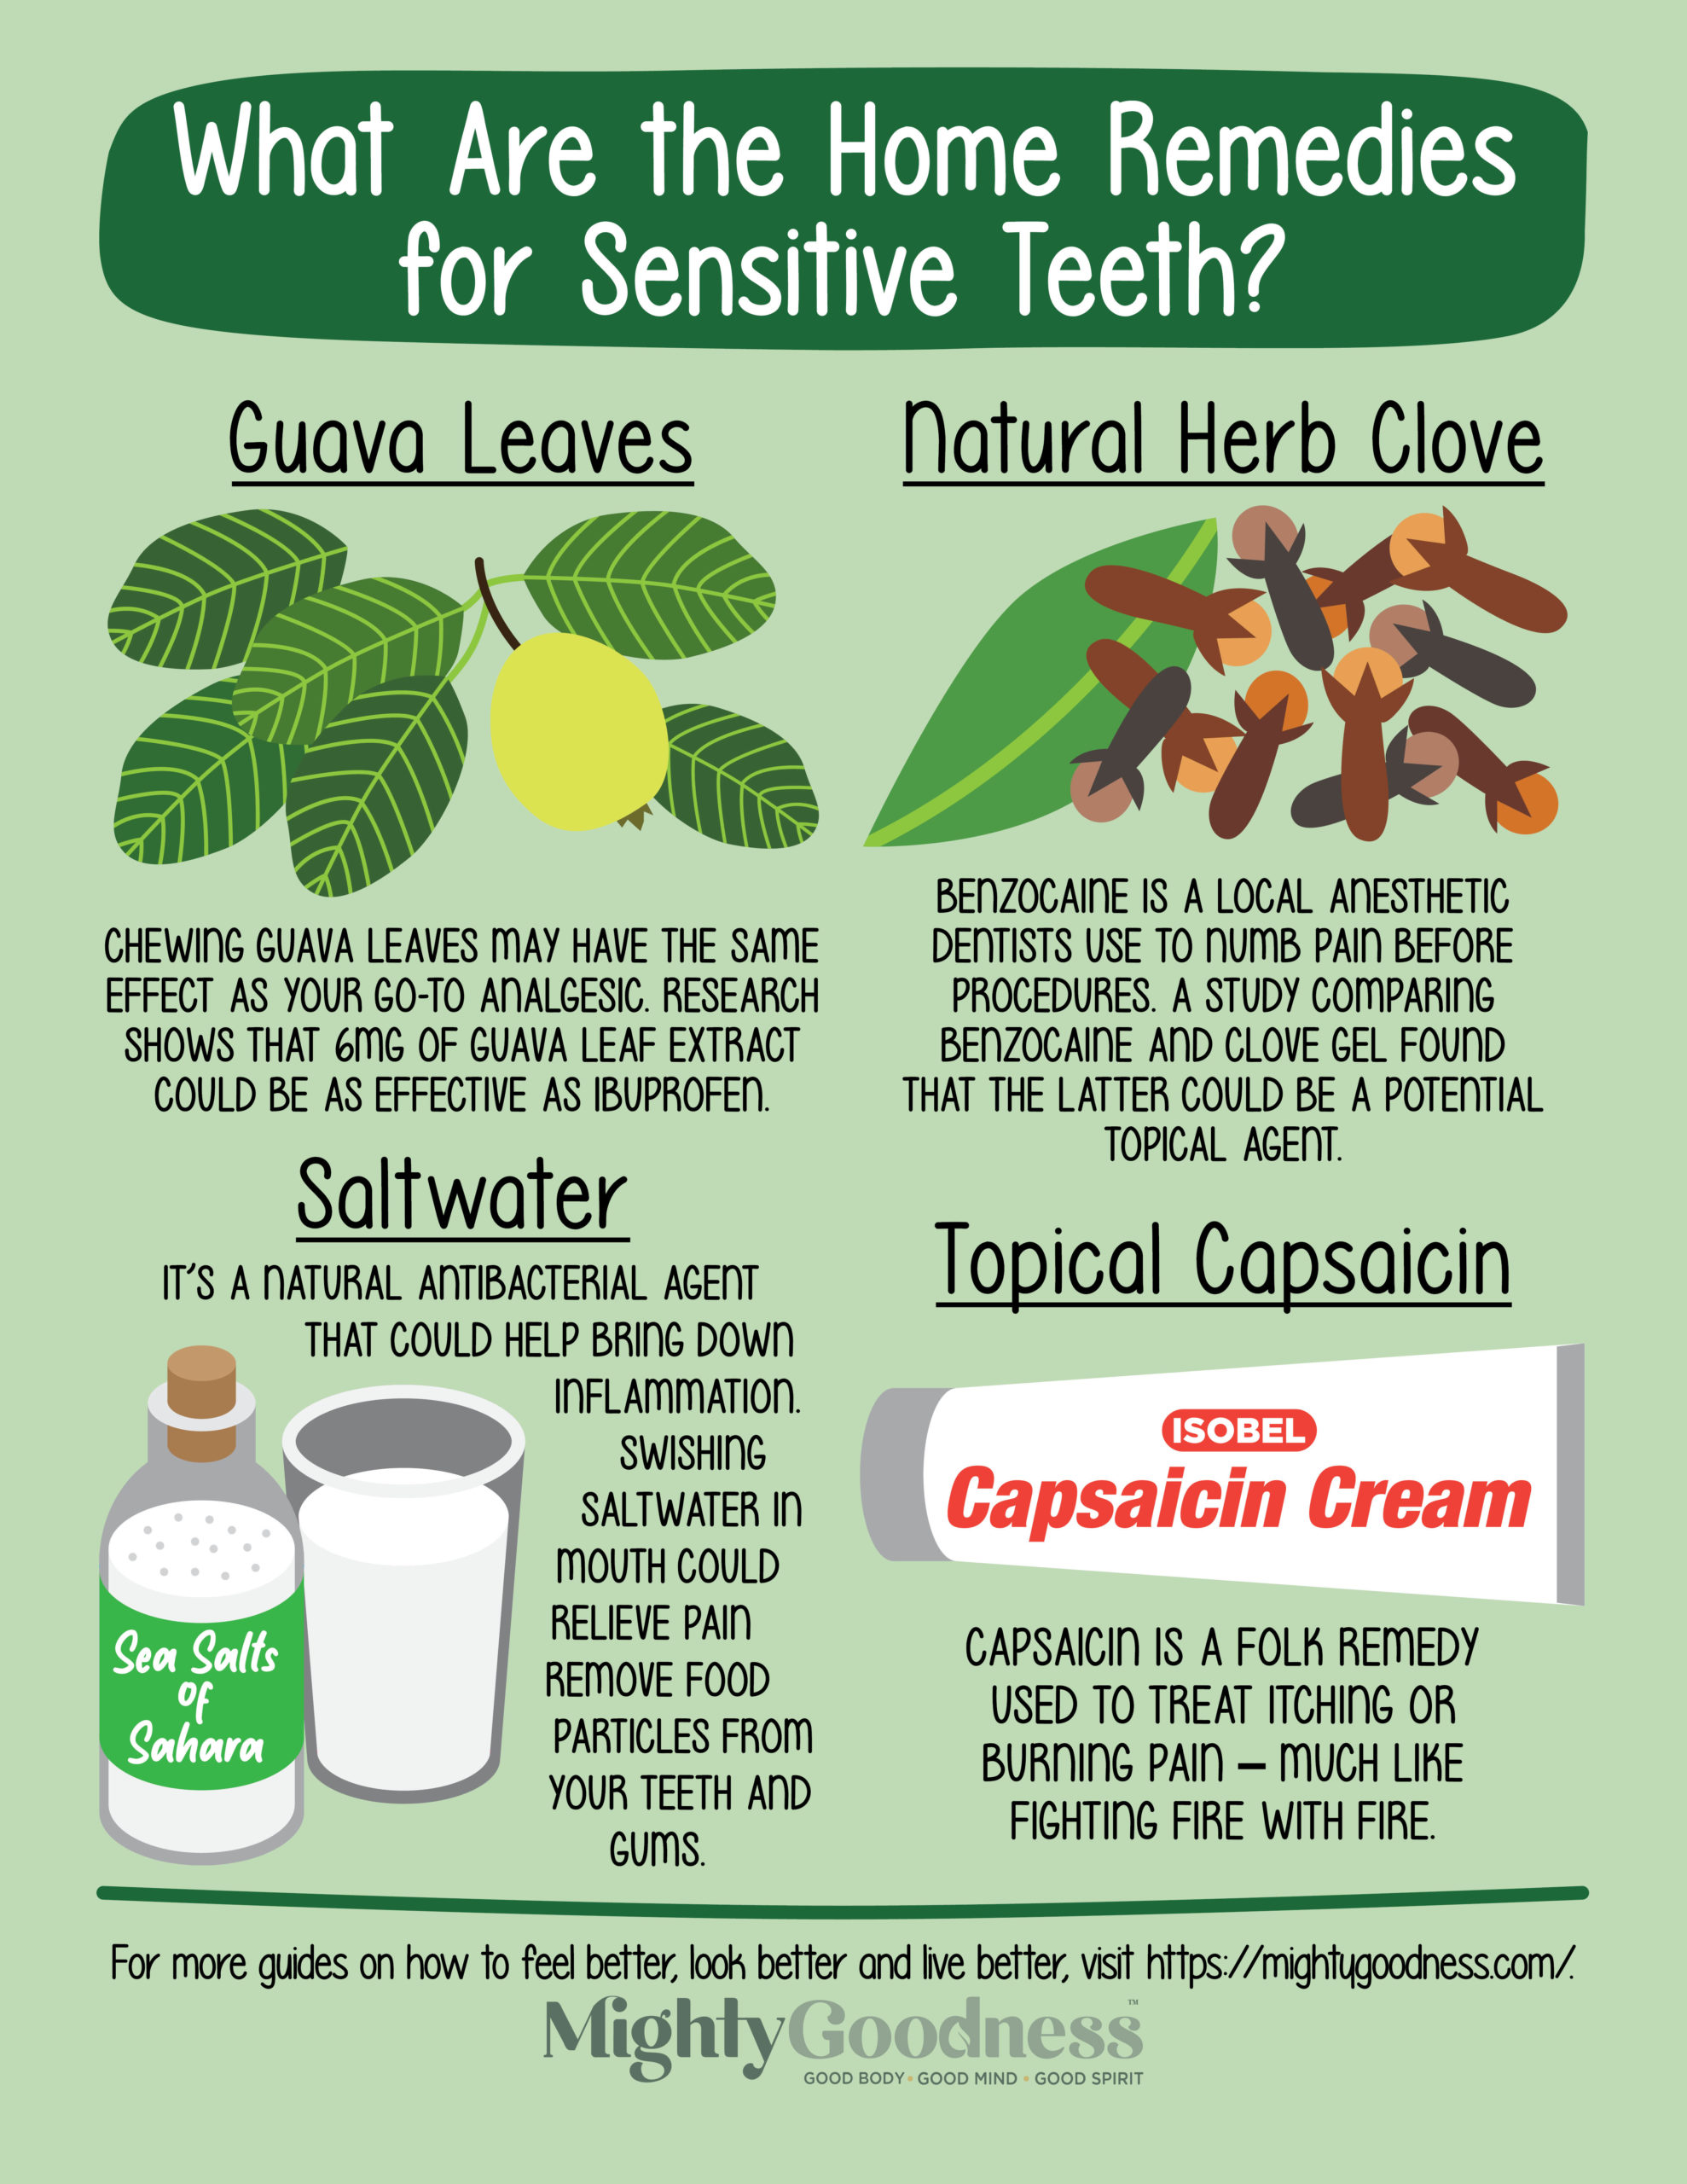 What Are the Home Remedies for Sensitive Teeth